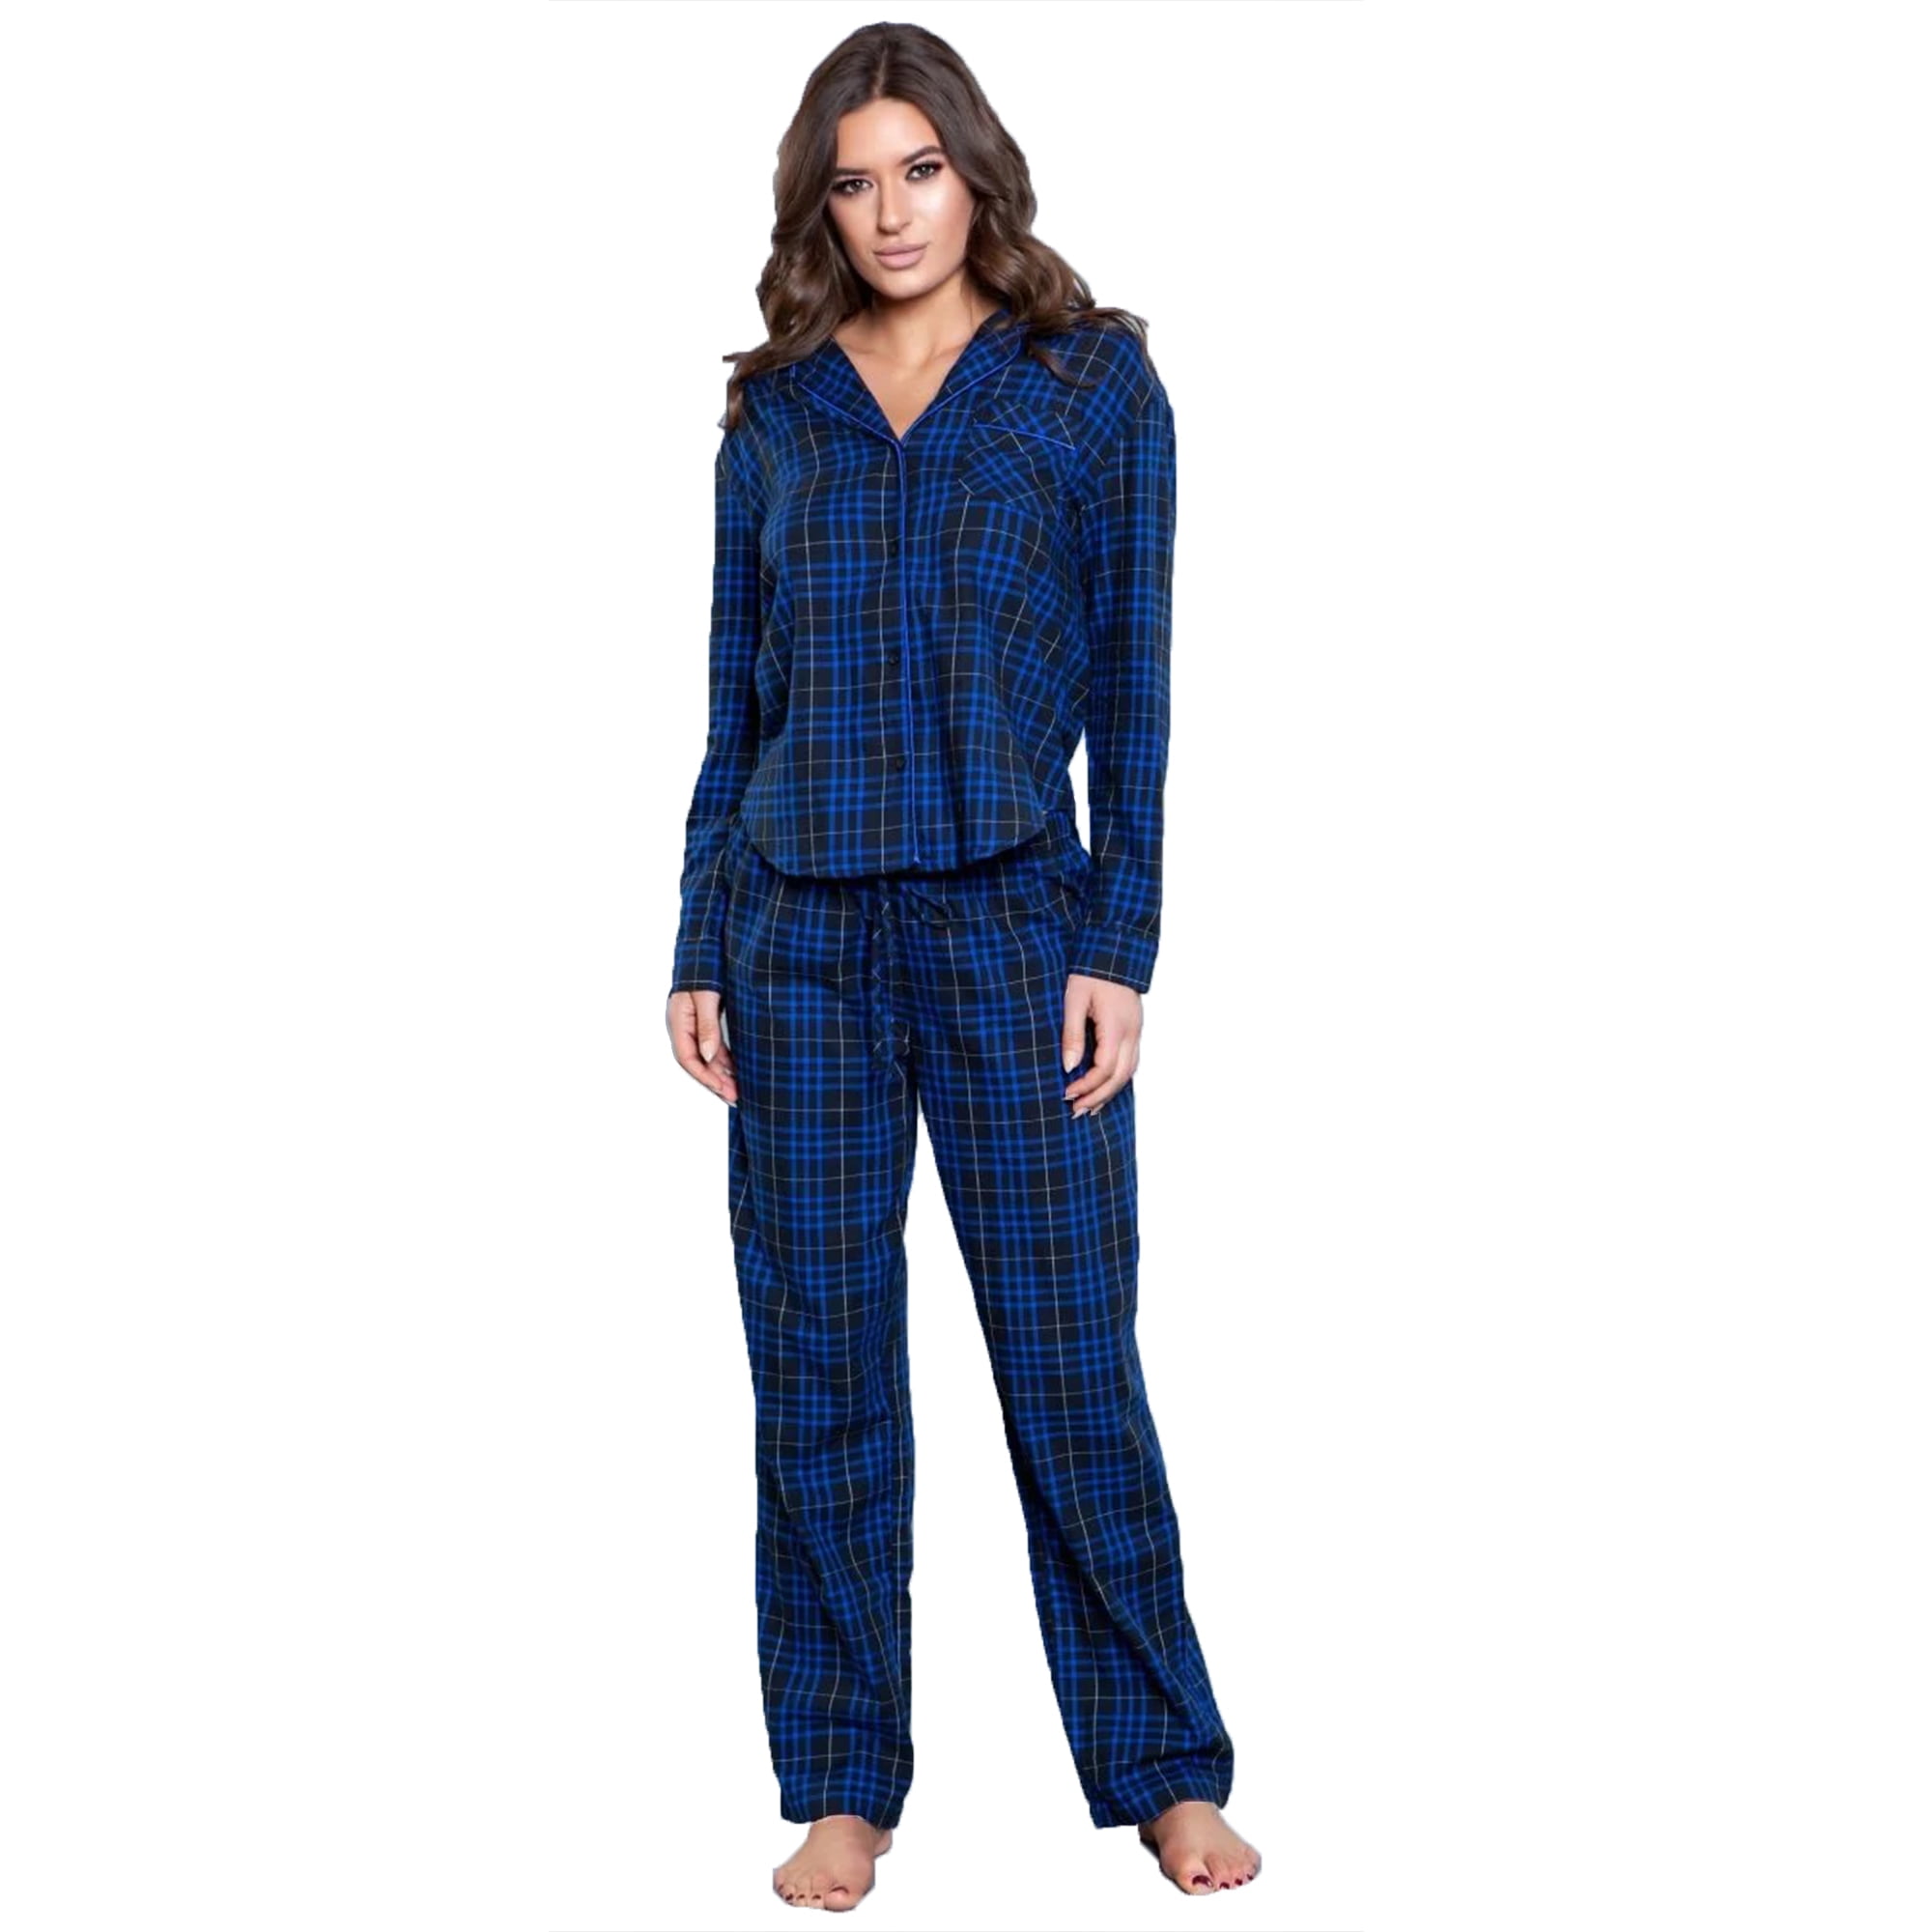 Warm and Cozy PJ Set of Loungewear Button Front Top Pants | 100% Cotton ...